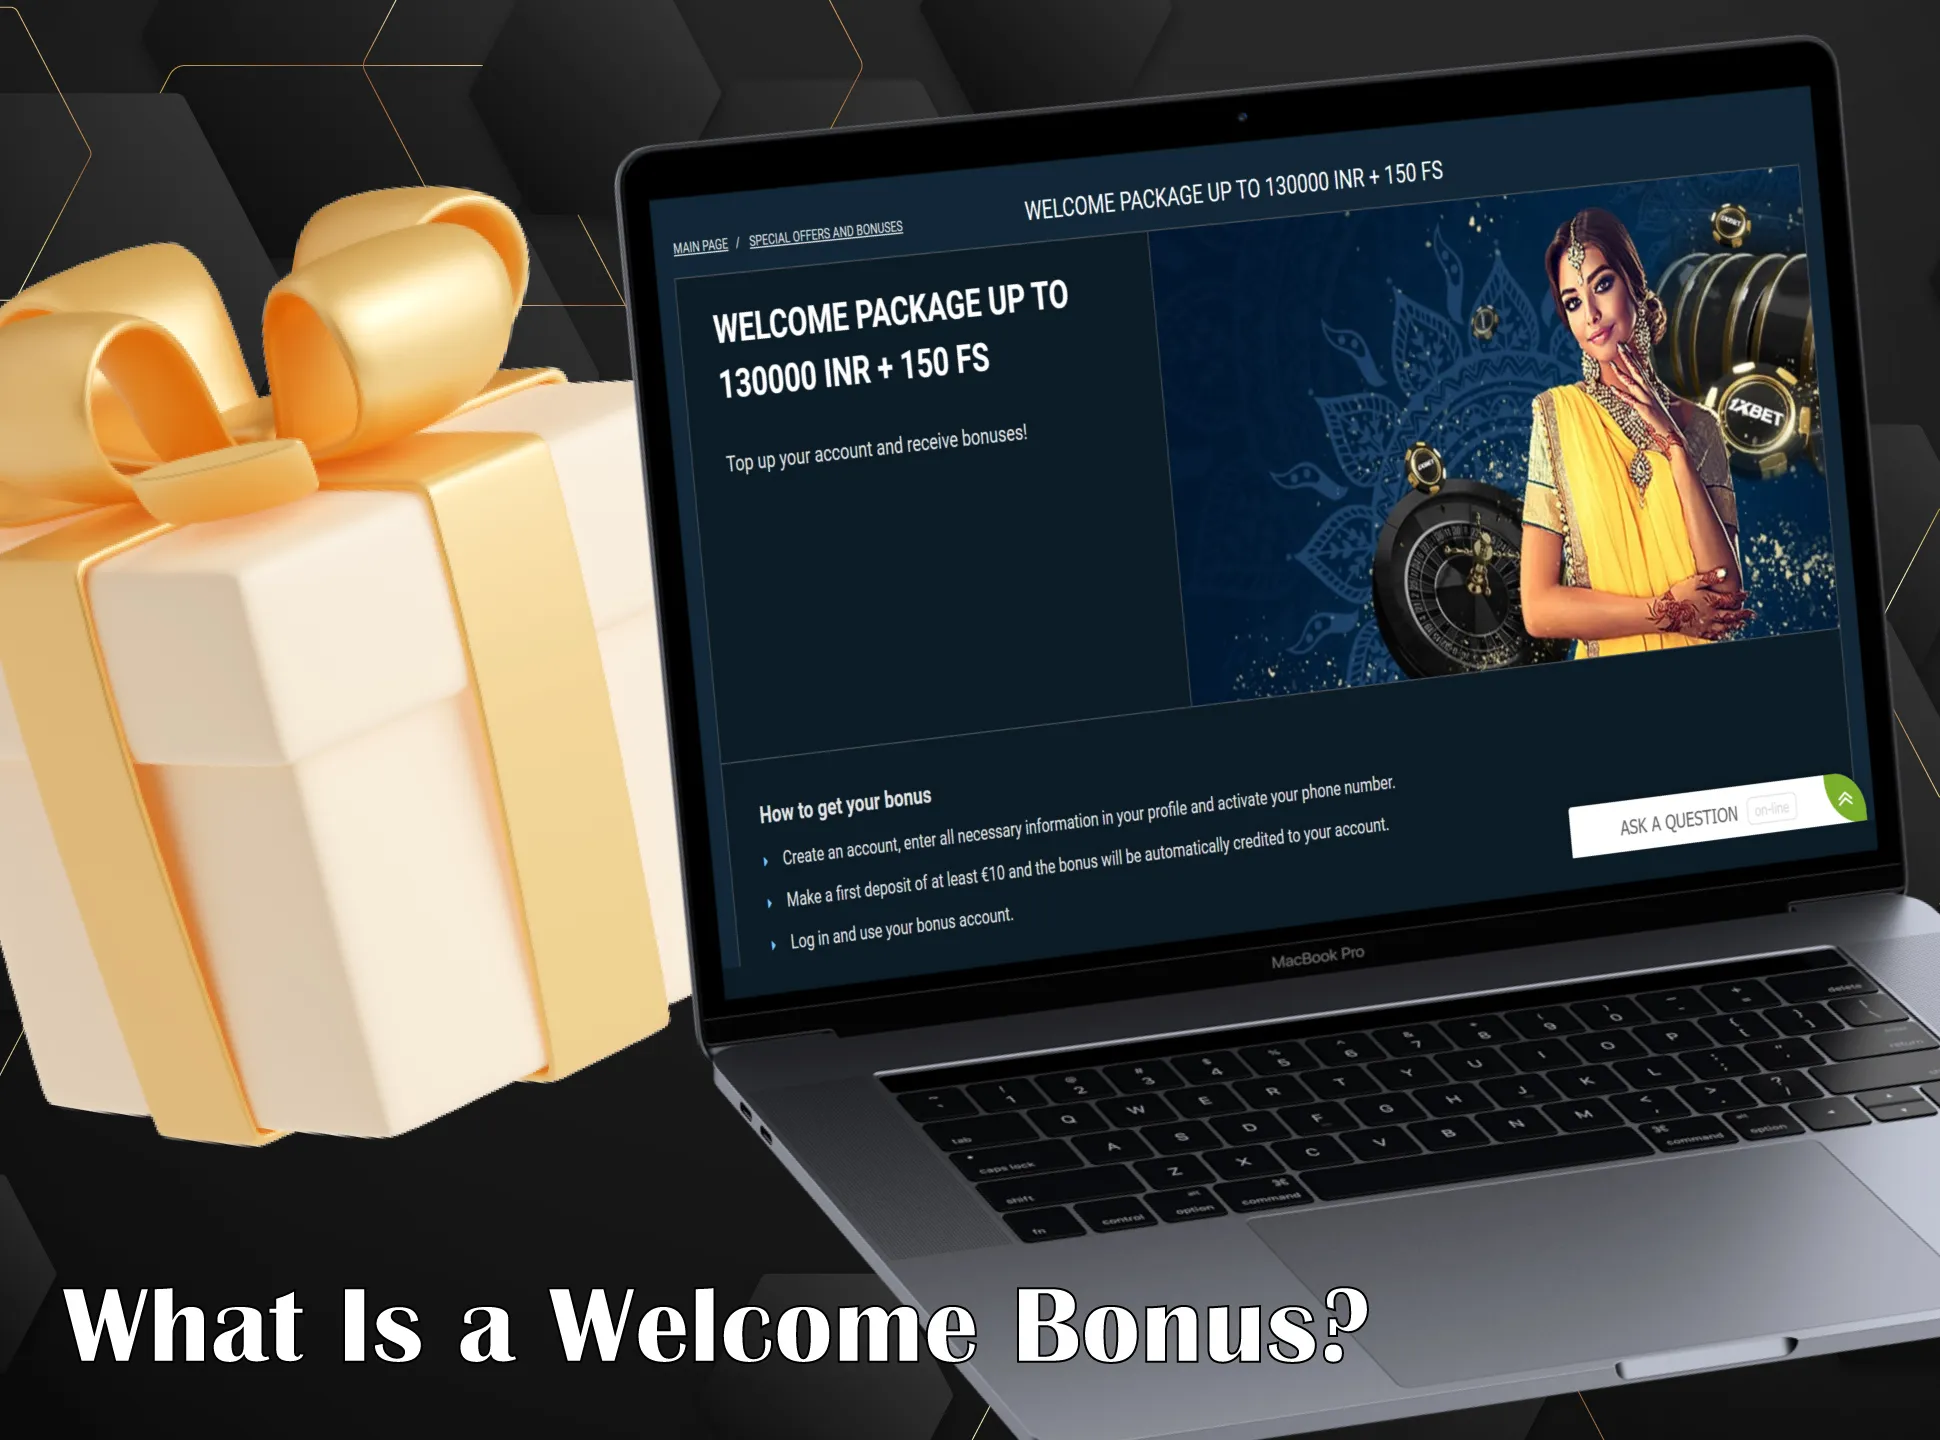 Welcome bonuses are meant for new users.